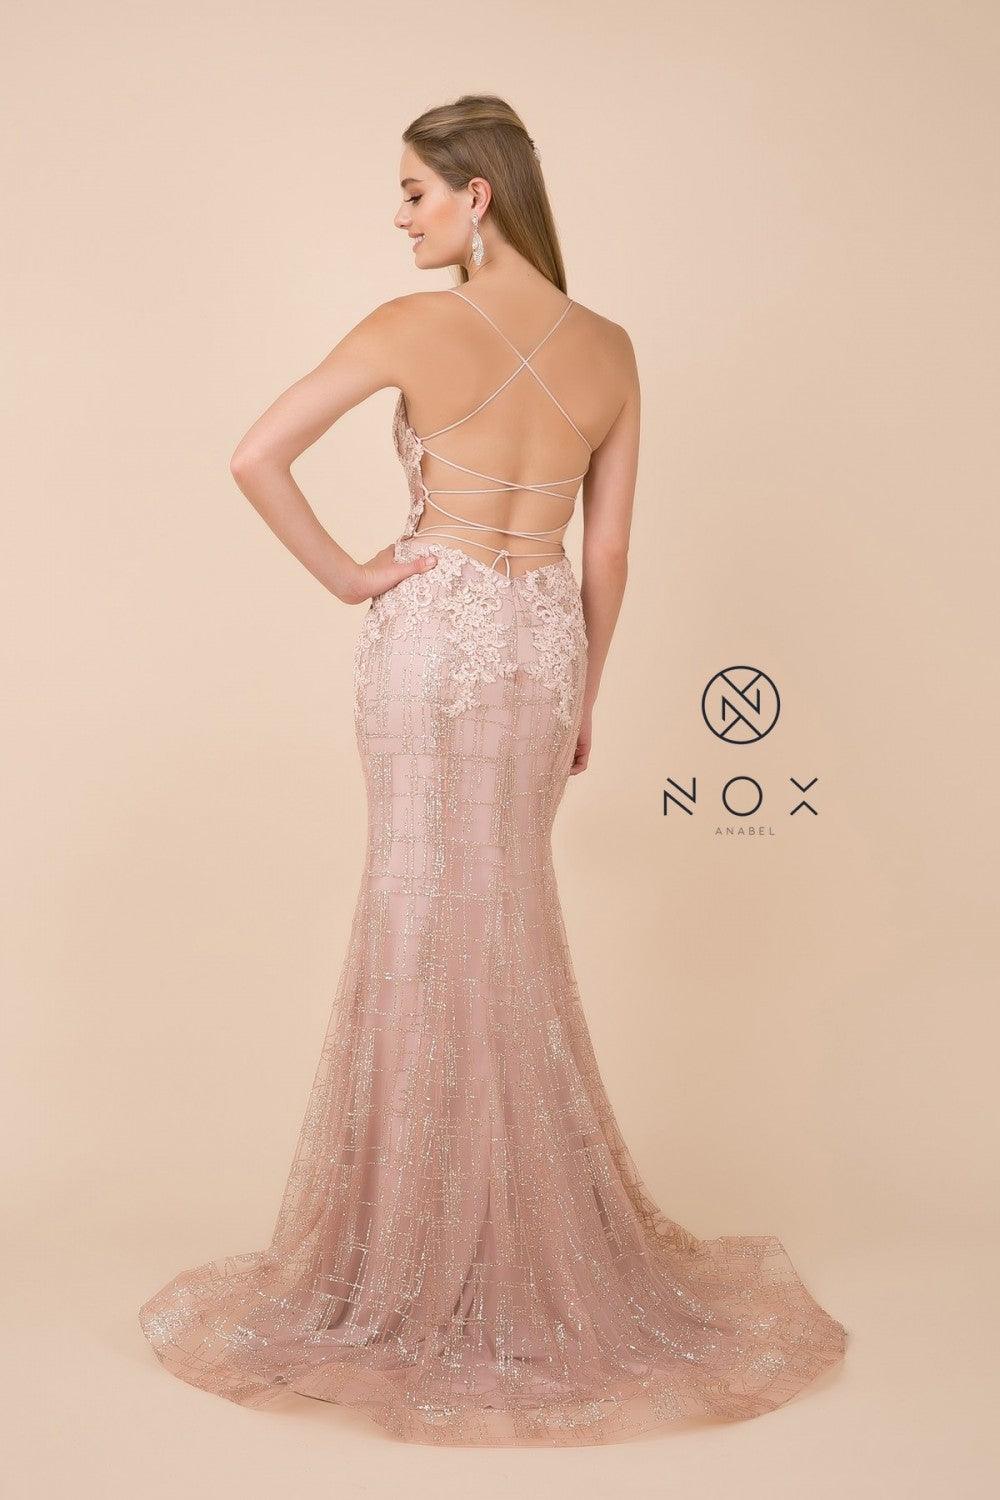 Sexy Long Fitted Prom Dress Evening Gown - The Dress Outlet Nox Anabel